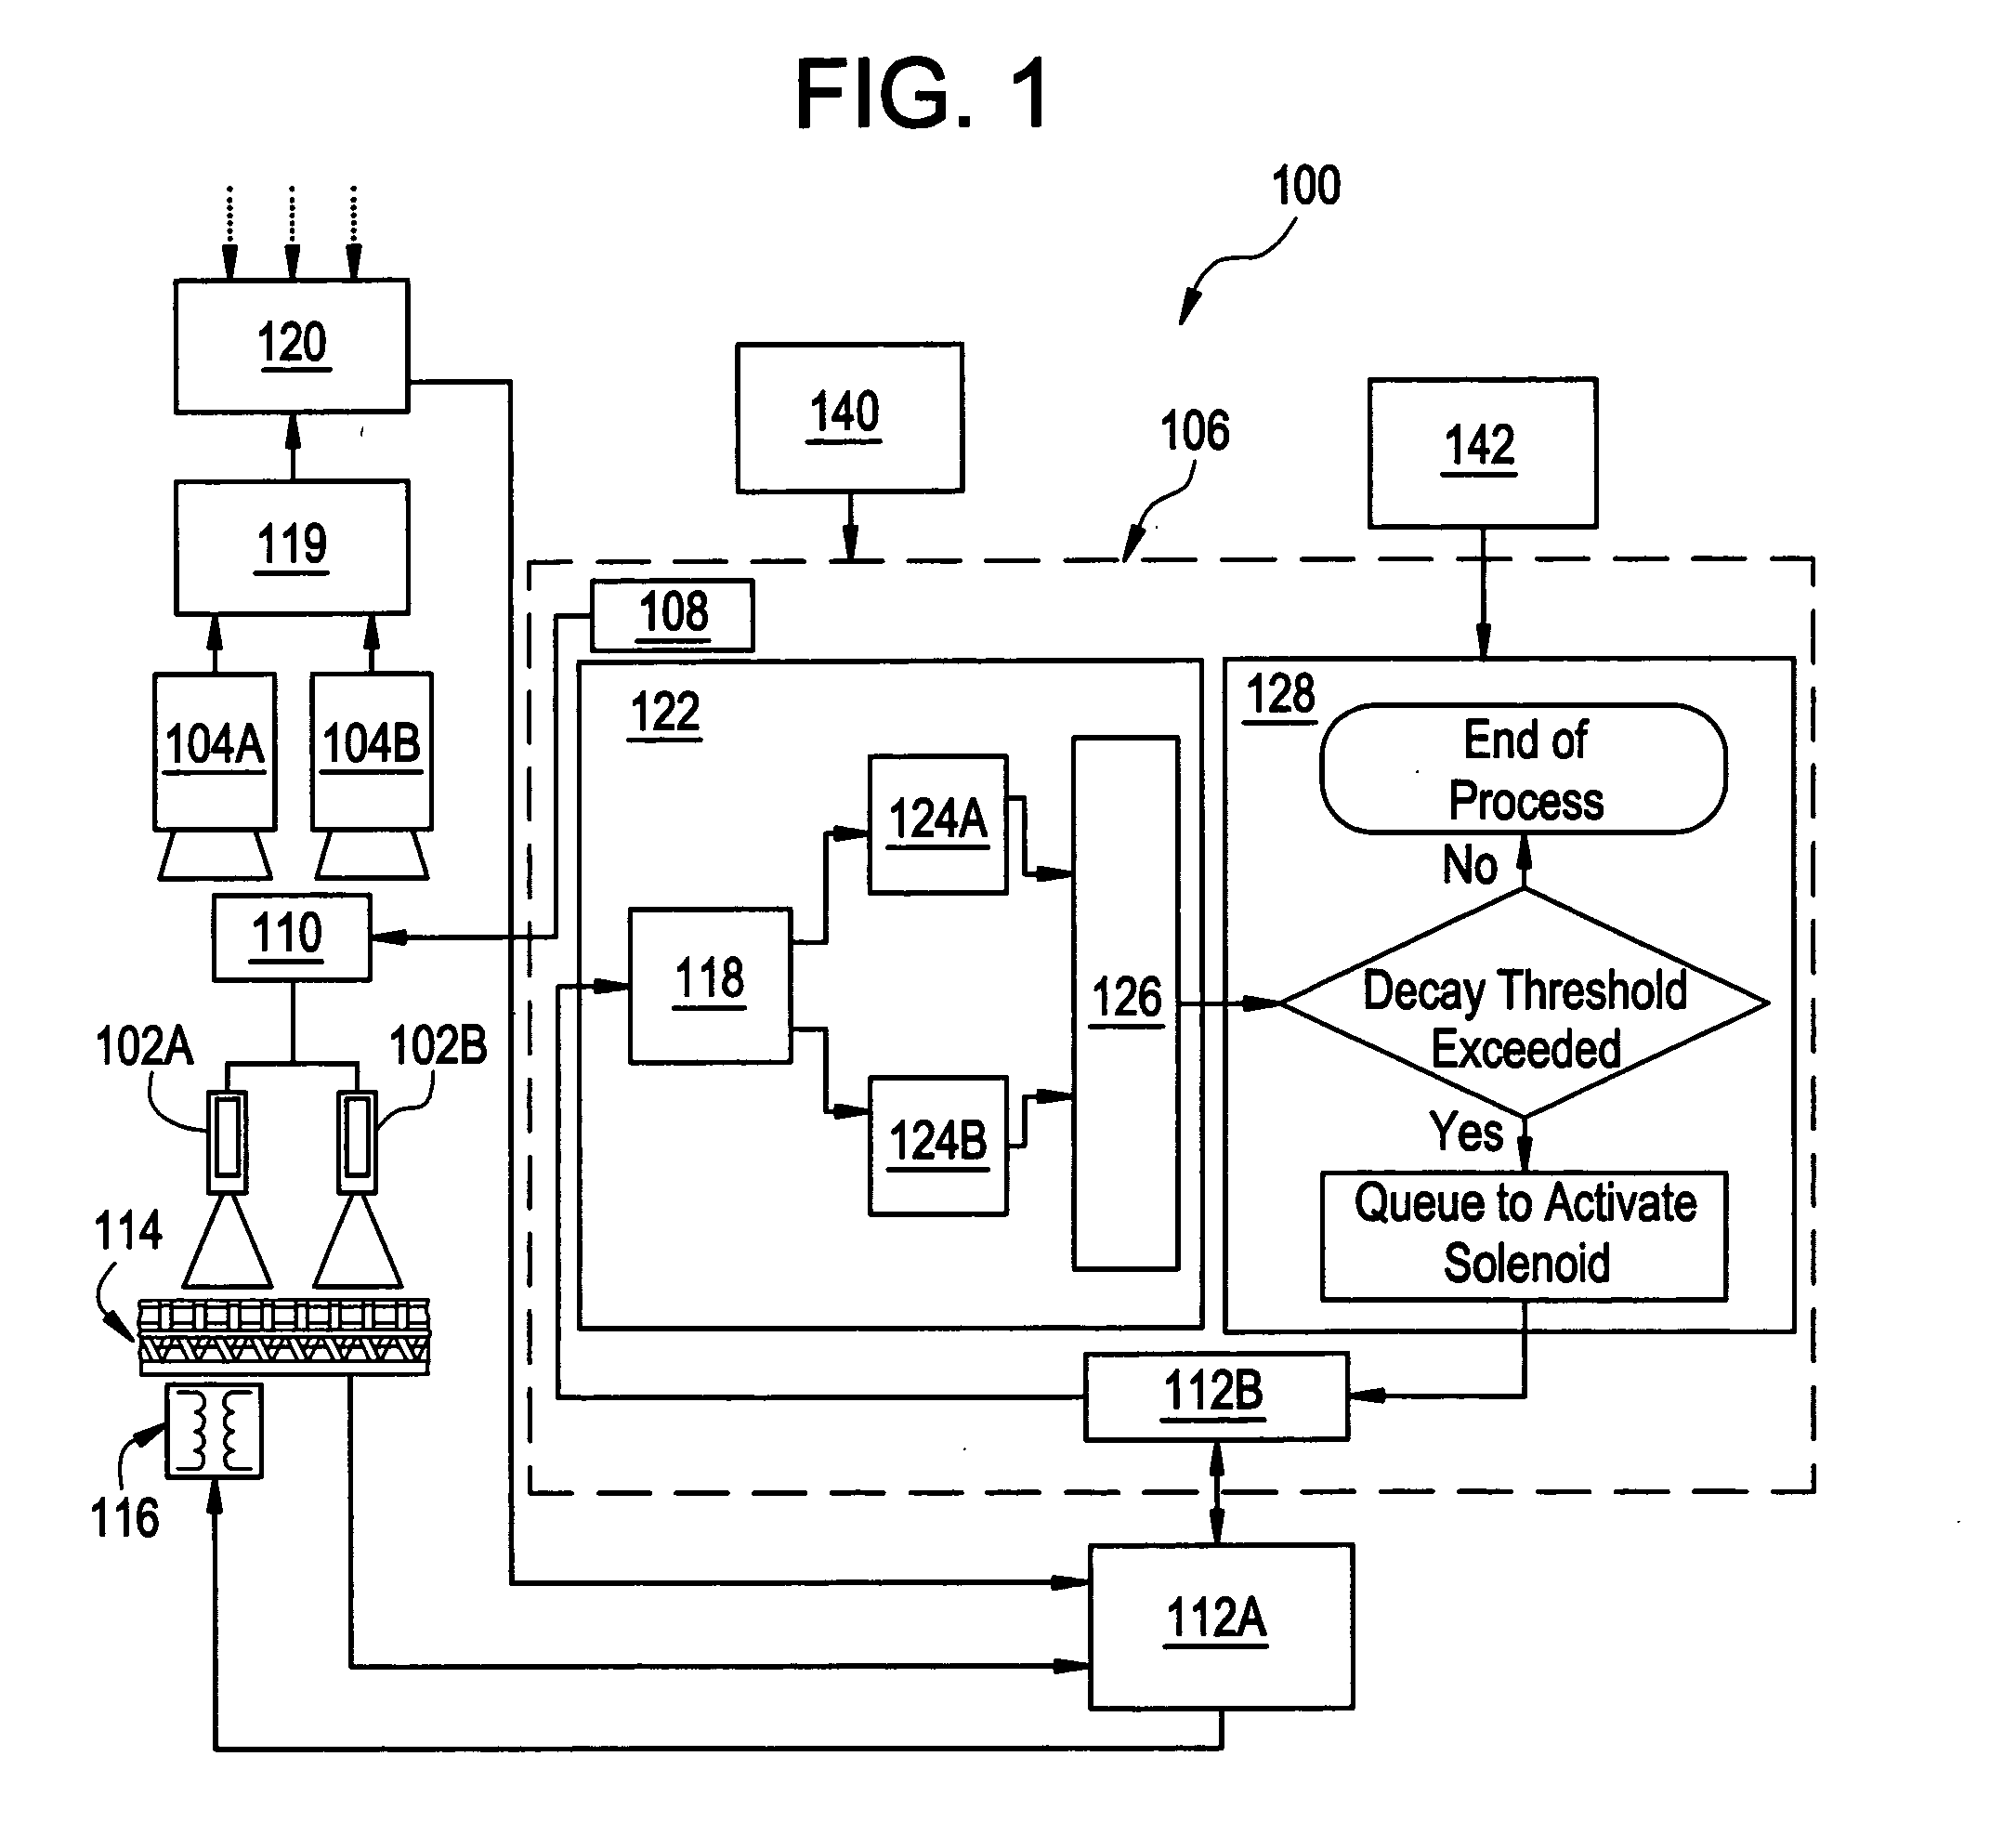 Method and apparatus for detecting damage in plant products